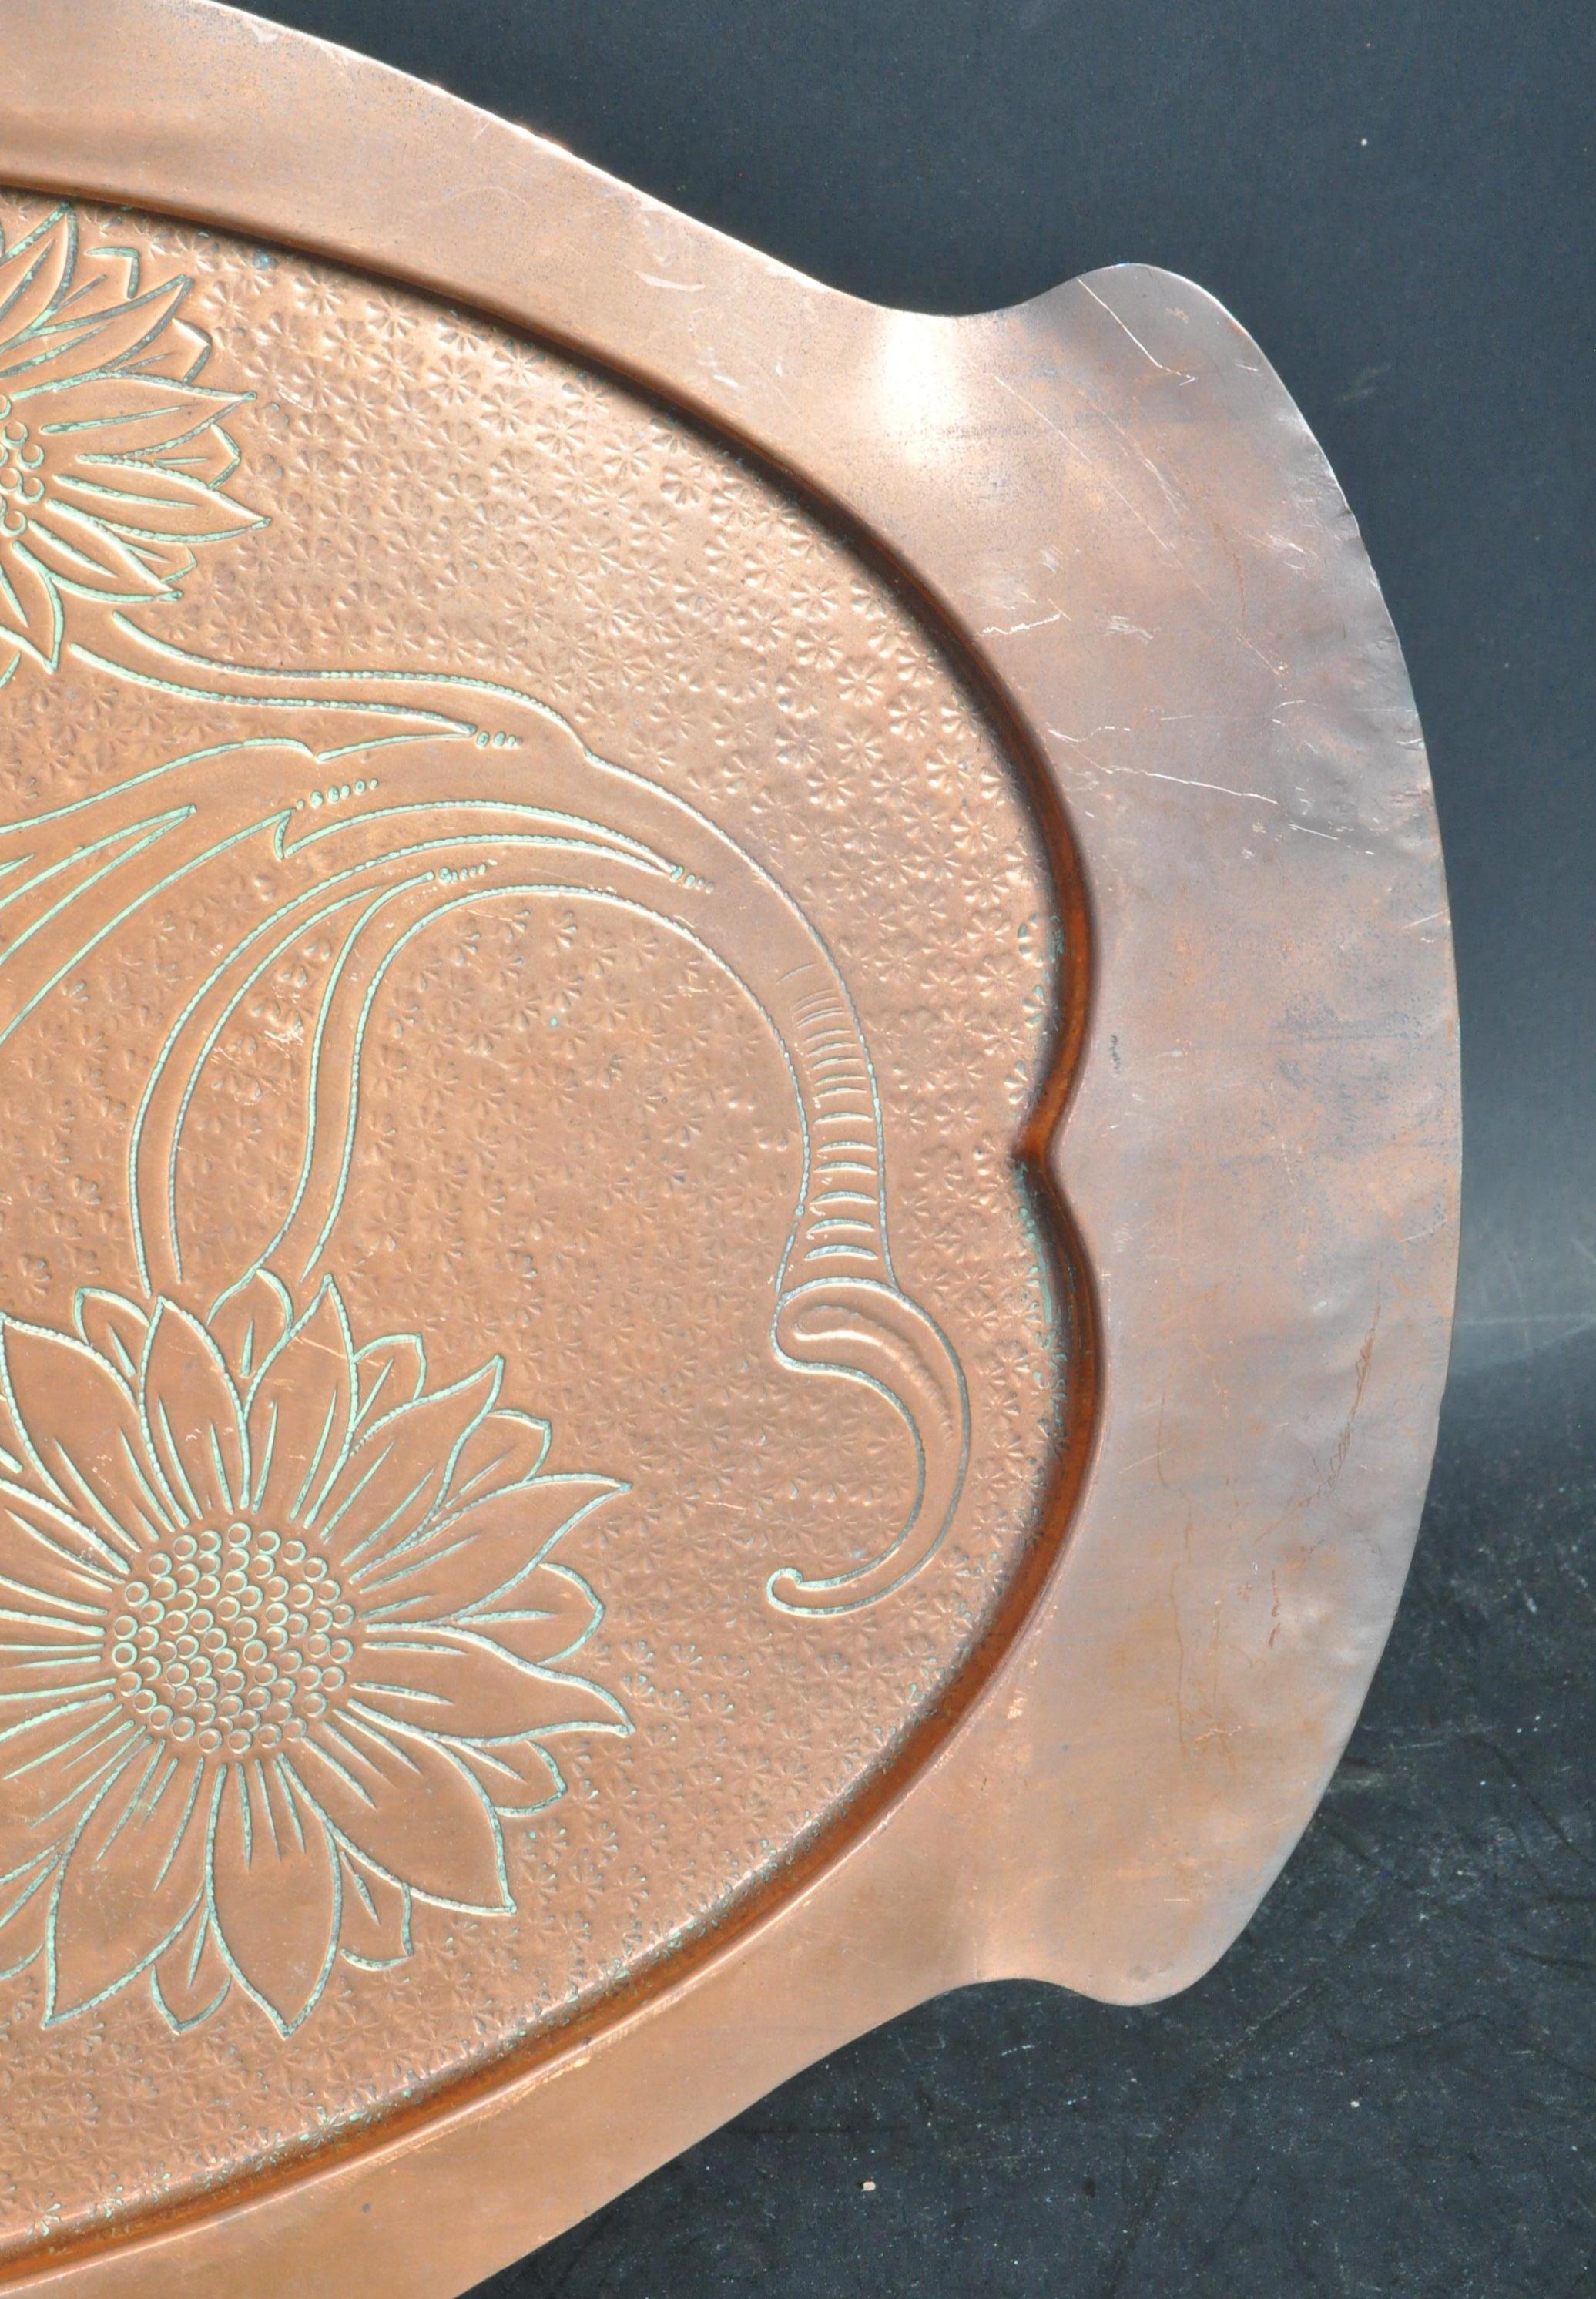 AN ART NOUVEAU ARTS & CRAFT BELDRAY COPPER TRAY - Image 3 of 4